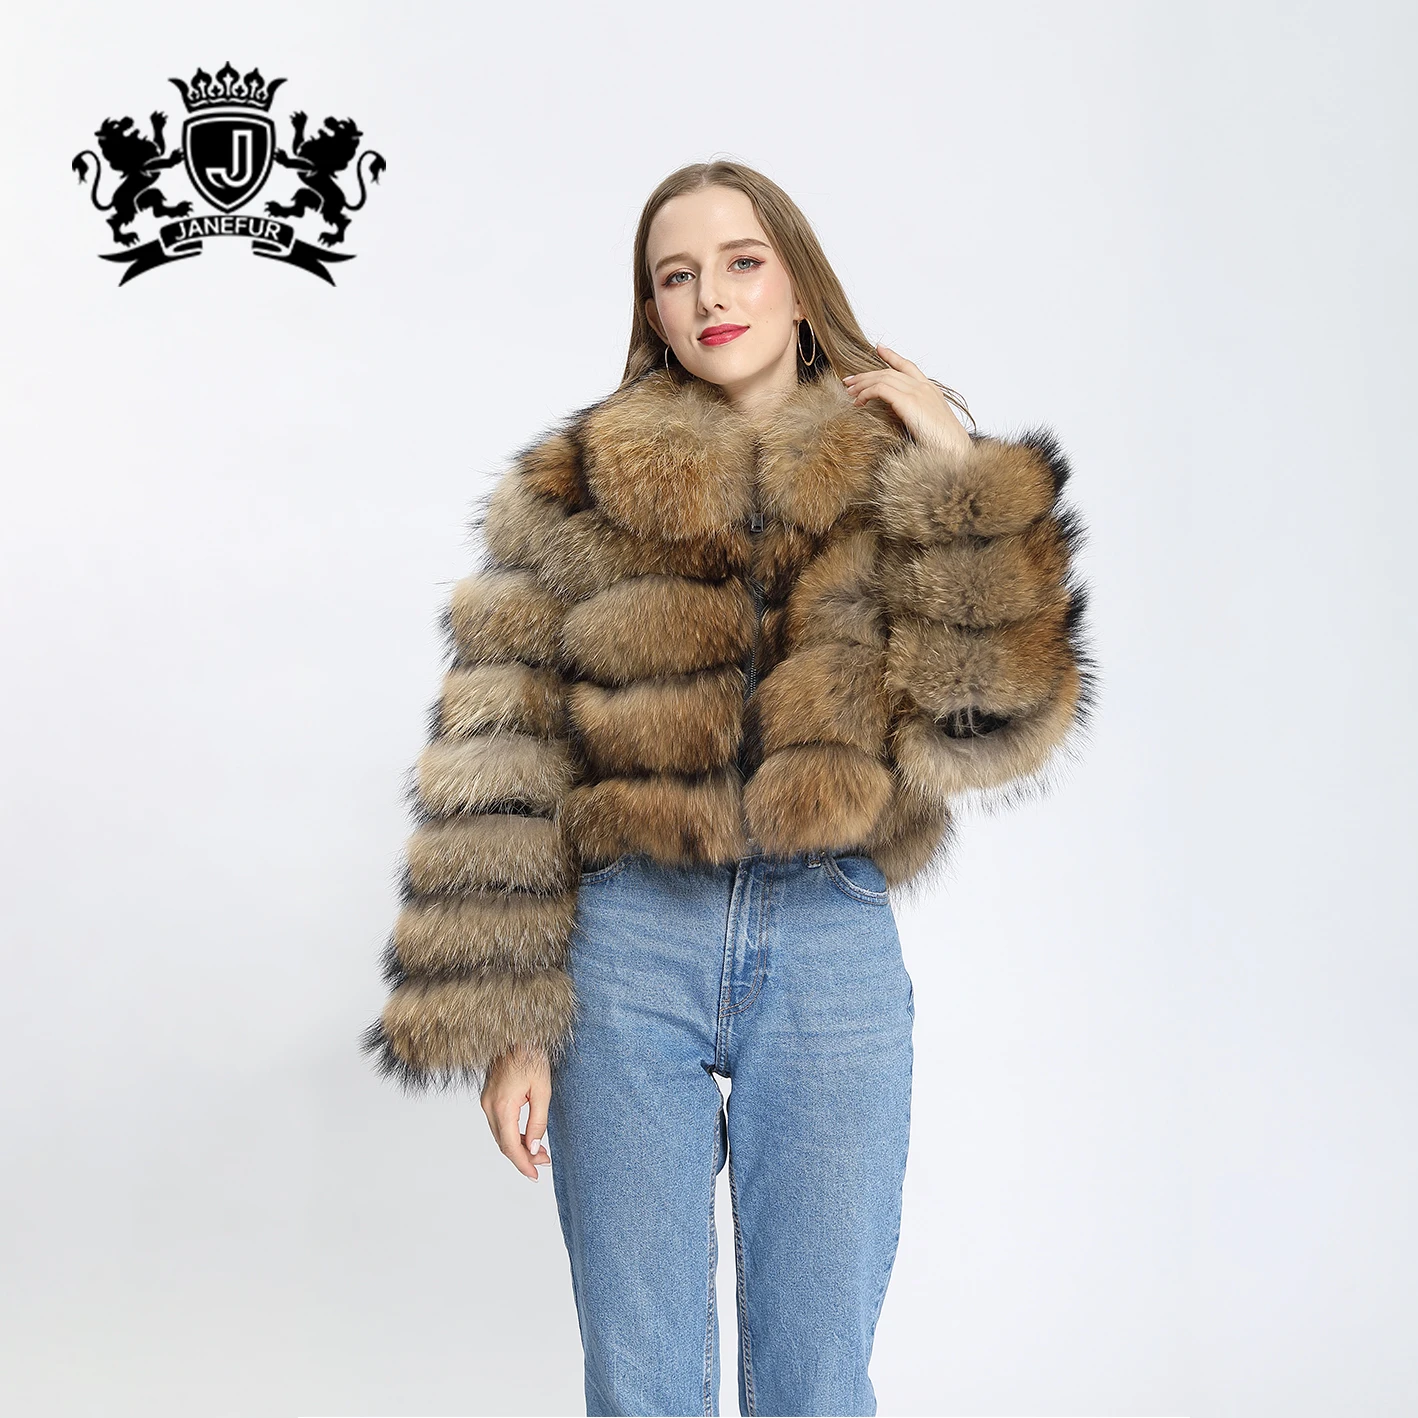 

Janefur Winter Real Fur Coats for Lady Custom Color Natural Brown Raccoon Short Jacket Soft Long Fur Women Furry Coat, 31 colors for stock, customized color